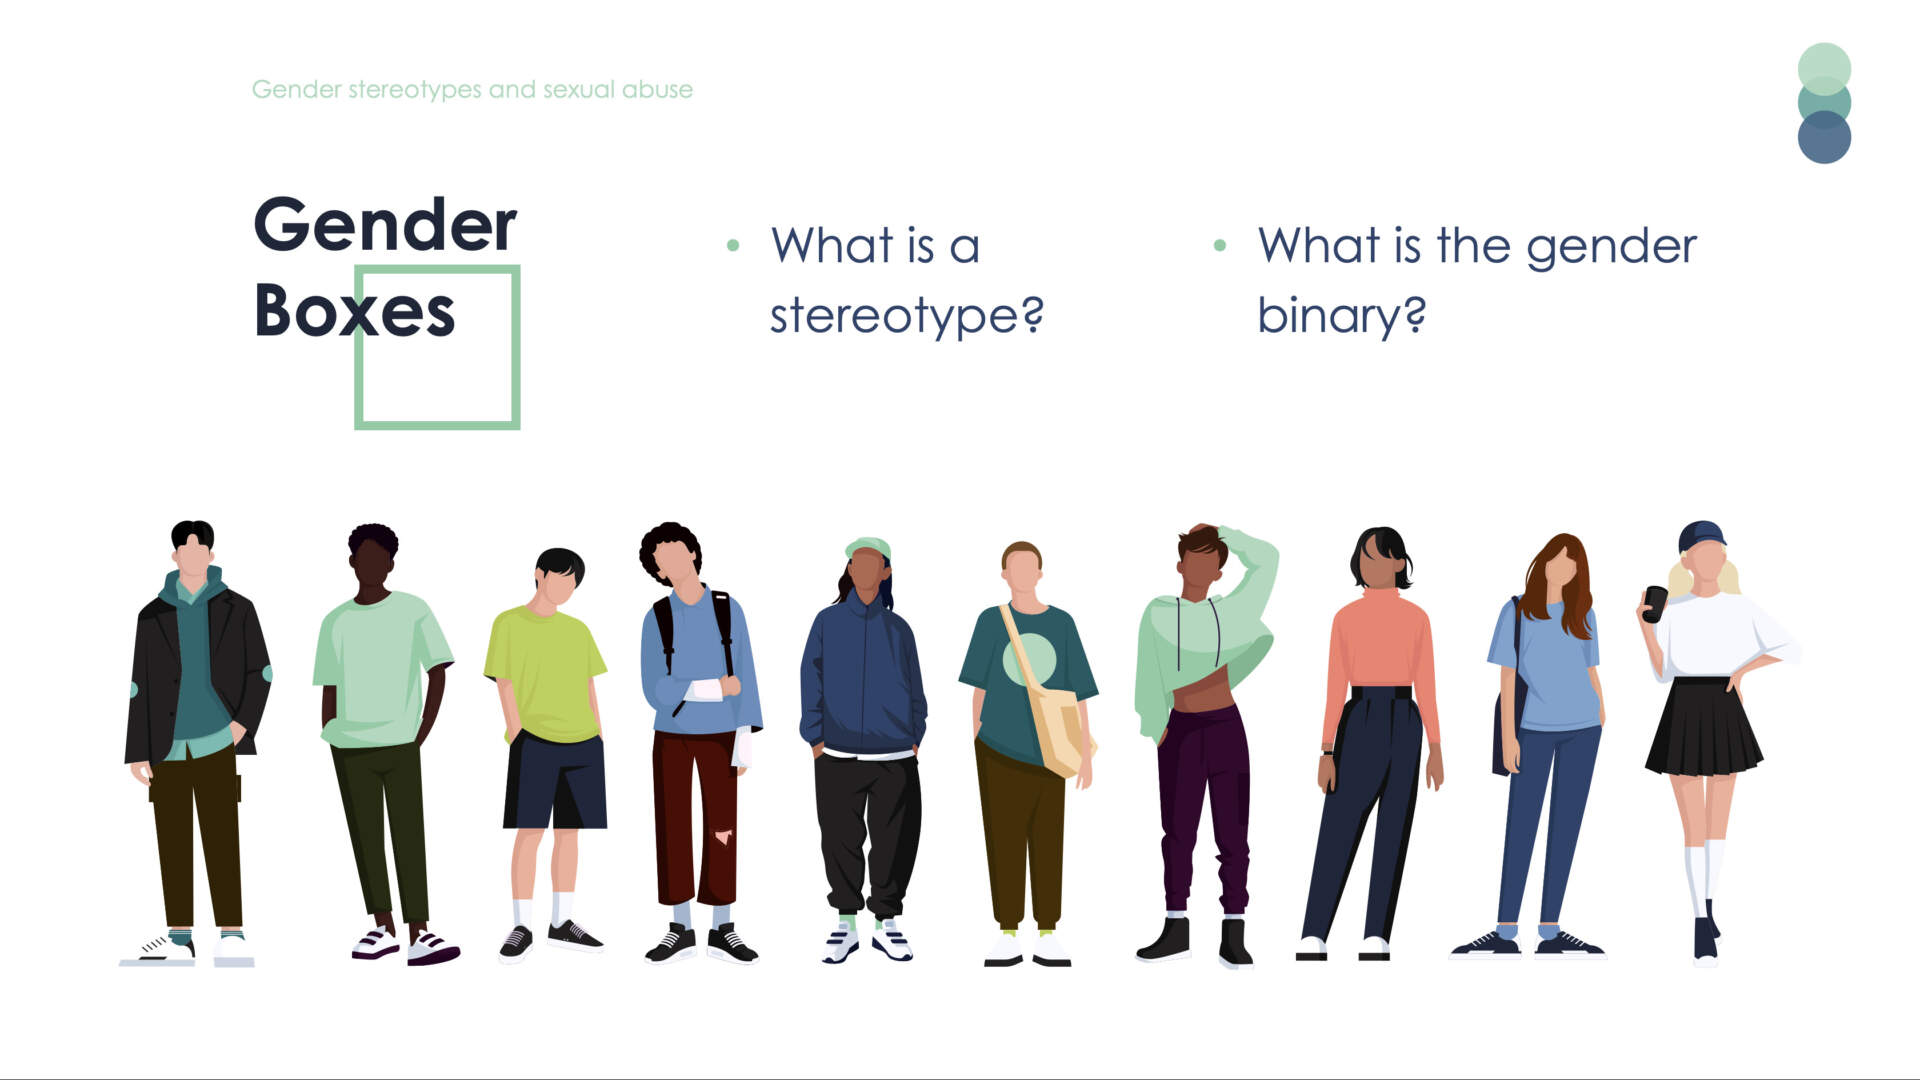 Ten stylized illustrated individuals of diverse genders and backgrounds stand casually in a row as if waiting for a bus.